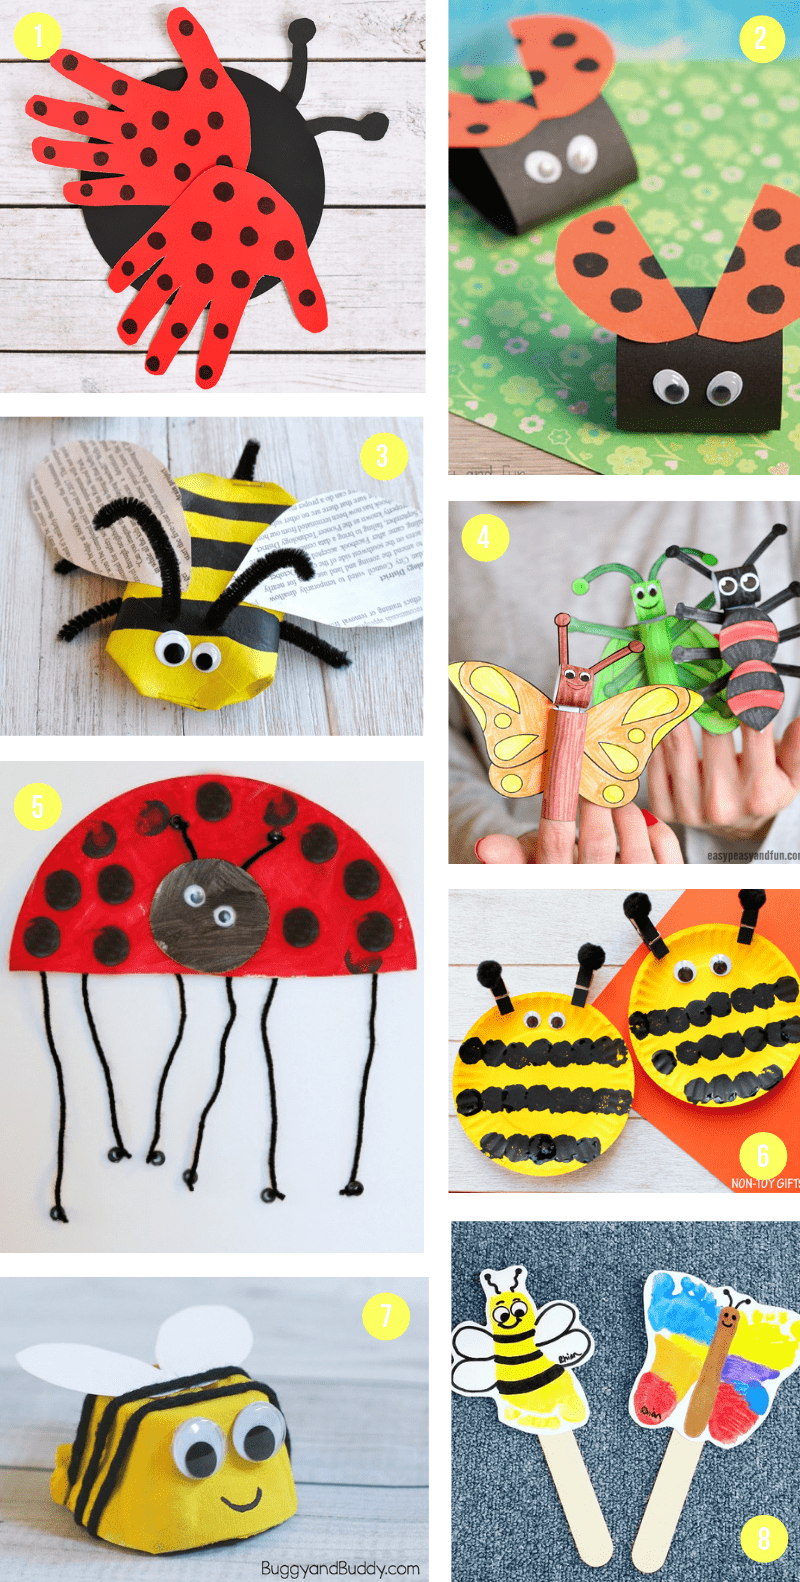 https://cdn.whatmomslove.com/wp-content/uploads/2019/02/Spring-Crafts-Ladybugs-and-bees-1.png